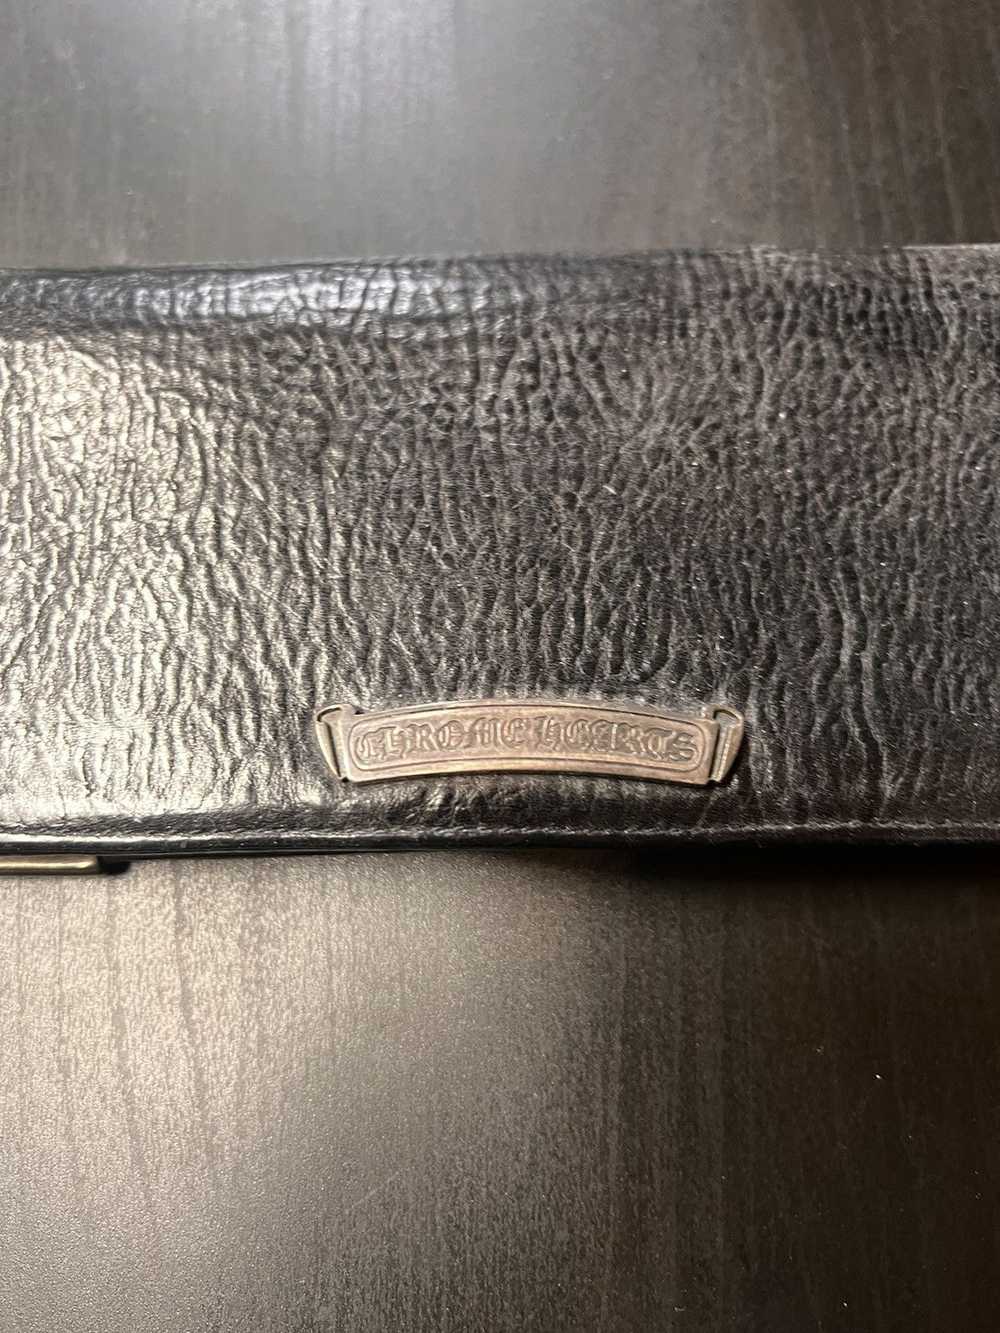 Chrome Hearts Chrome hearts long leather wallet - image 2